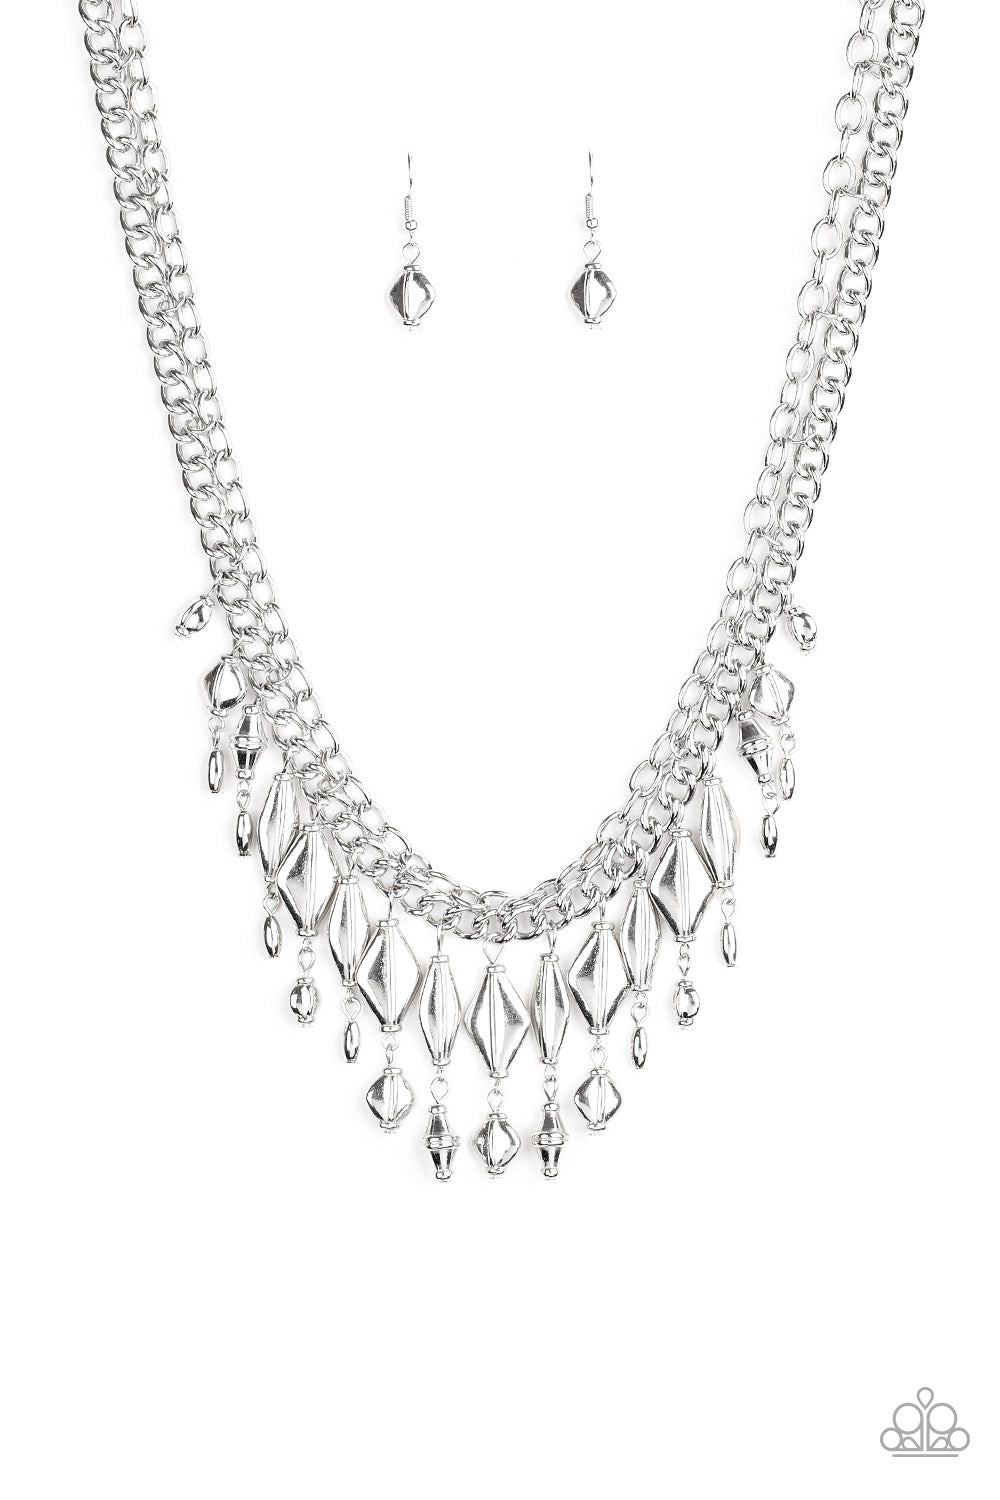 Paparazzi Accessories - Trinket Trade #N595 - Silver Necklace